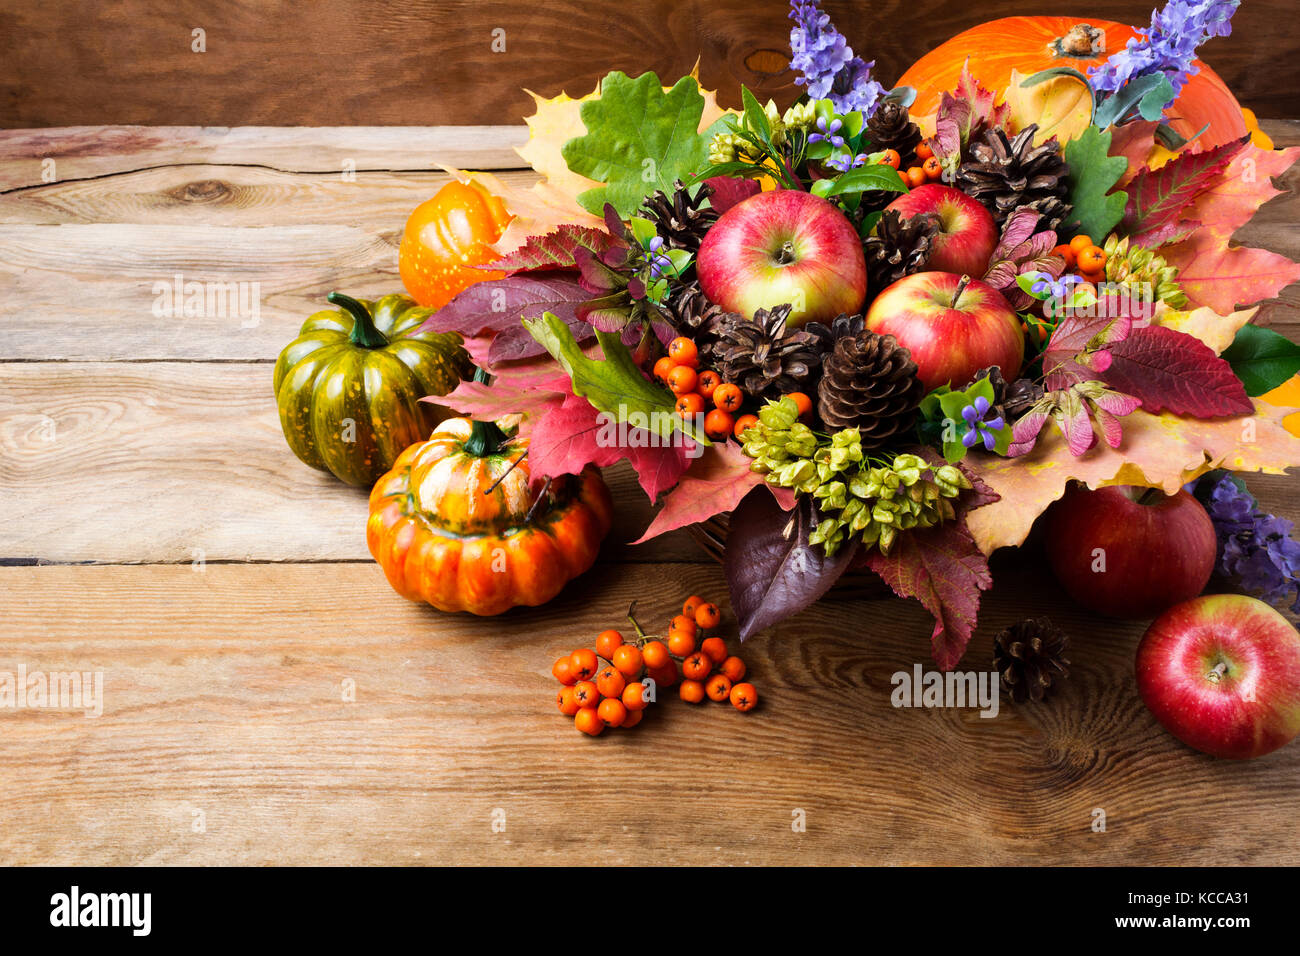 Thanksgiving or fall greeting background with ripe apples, rowan berries, green seeds, blue flowers, pumpkins, leaves Stock Photo